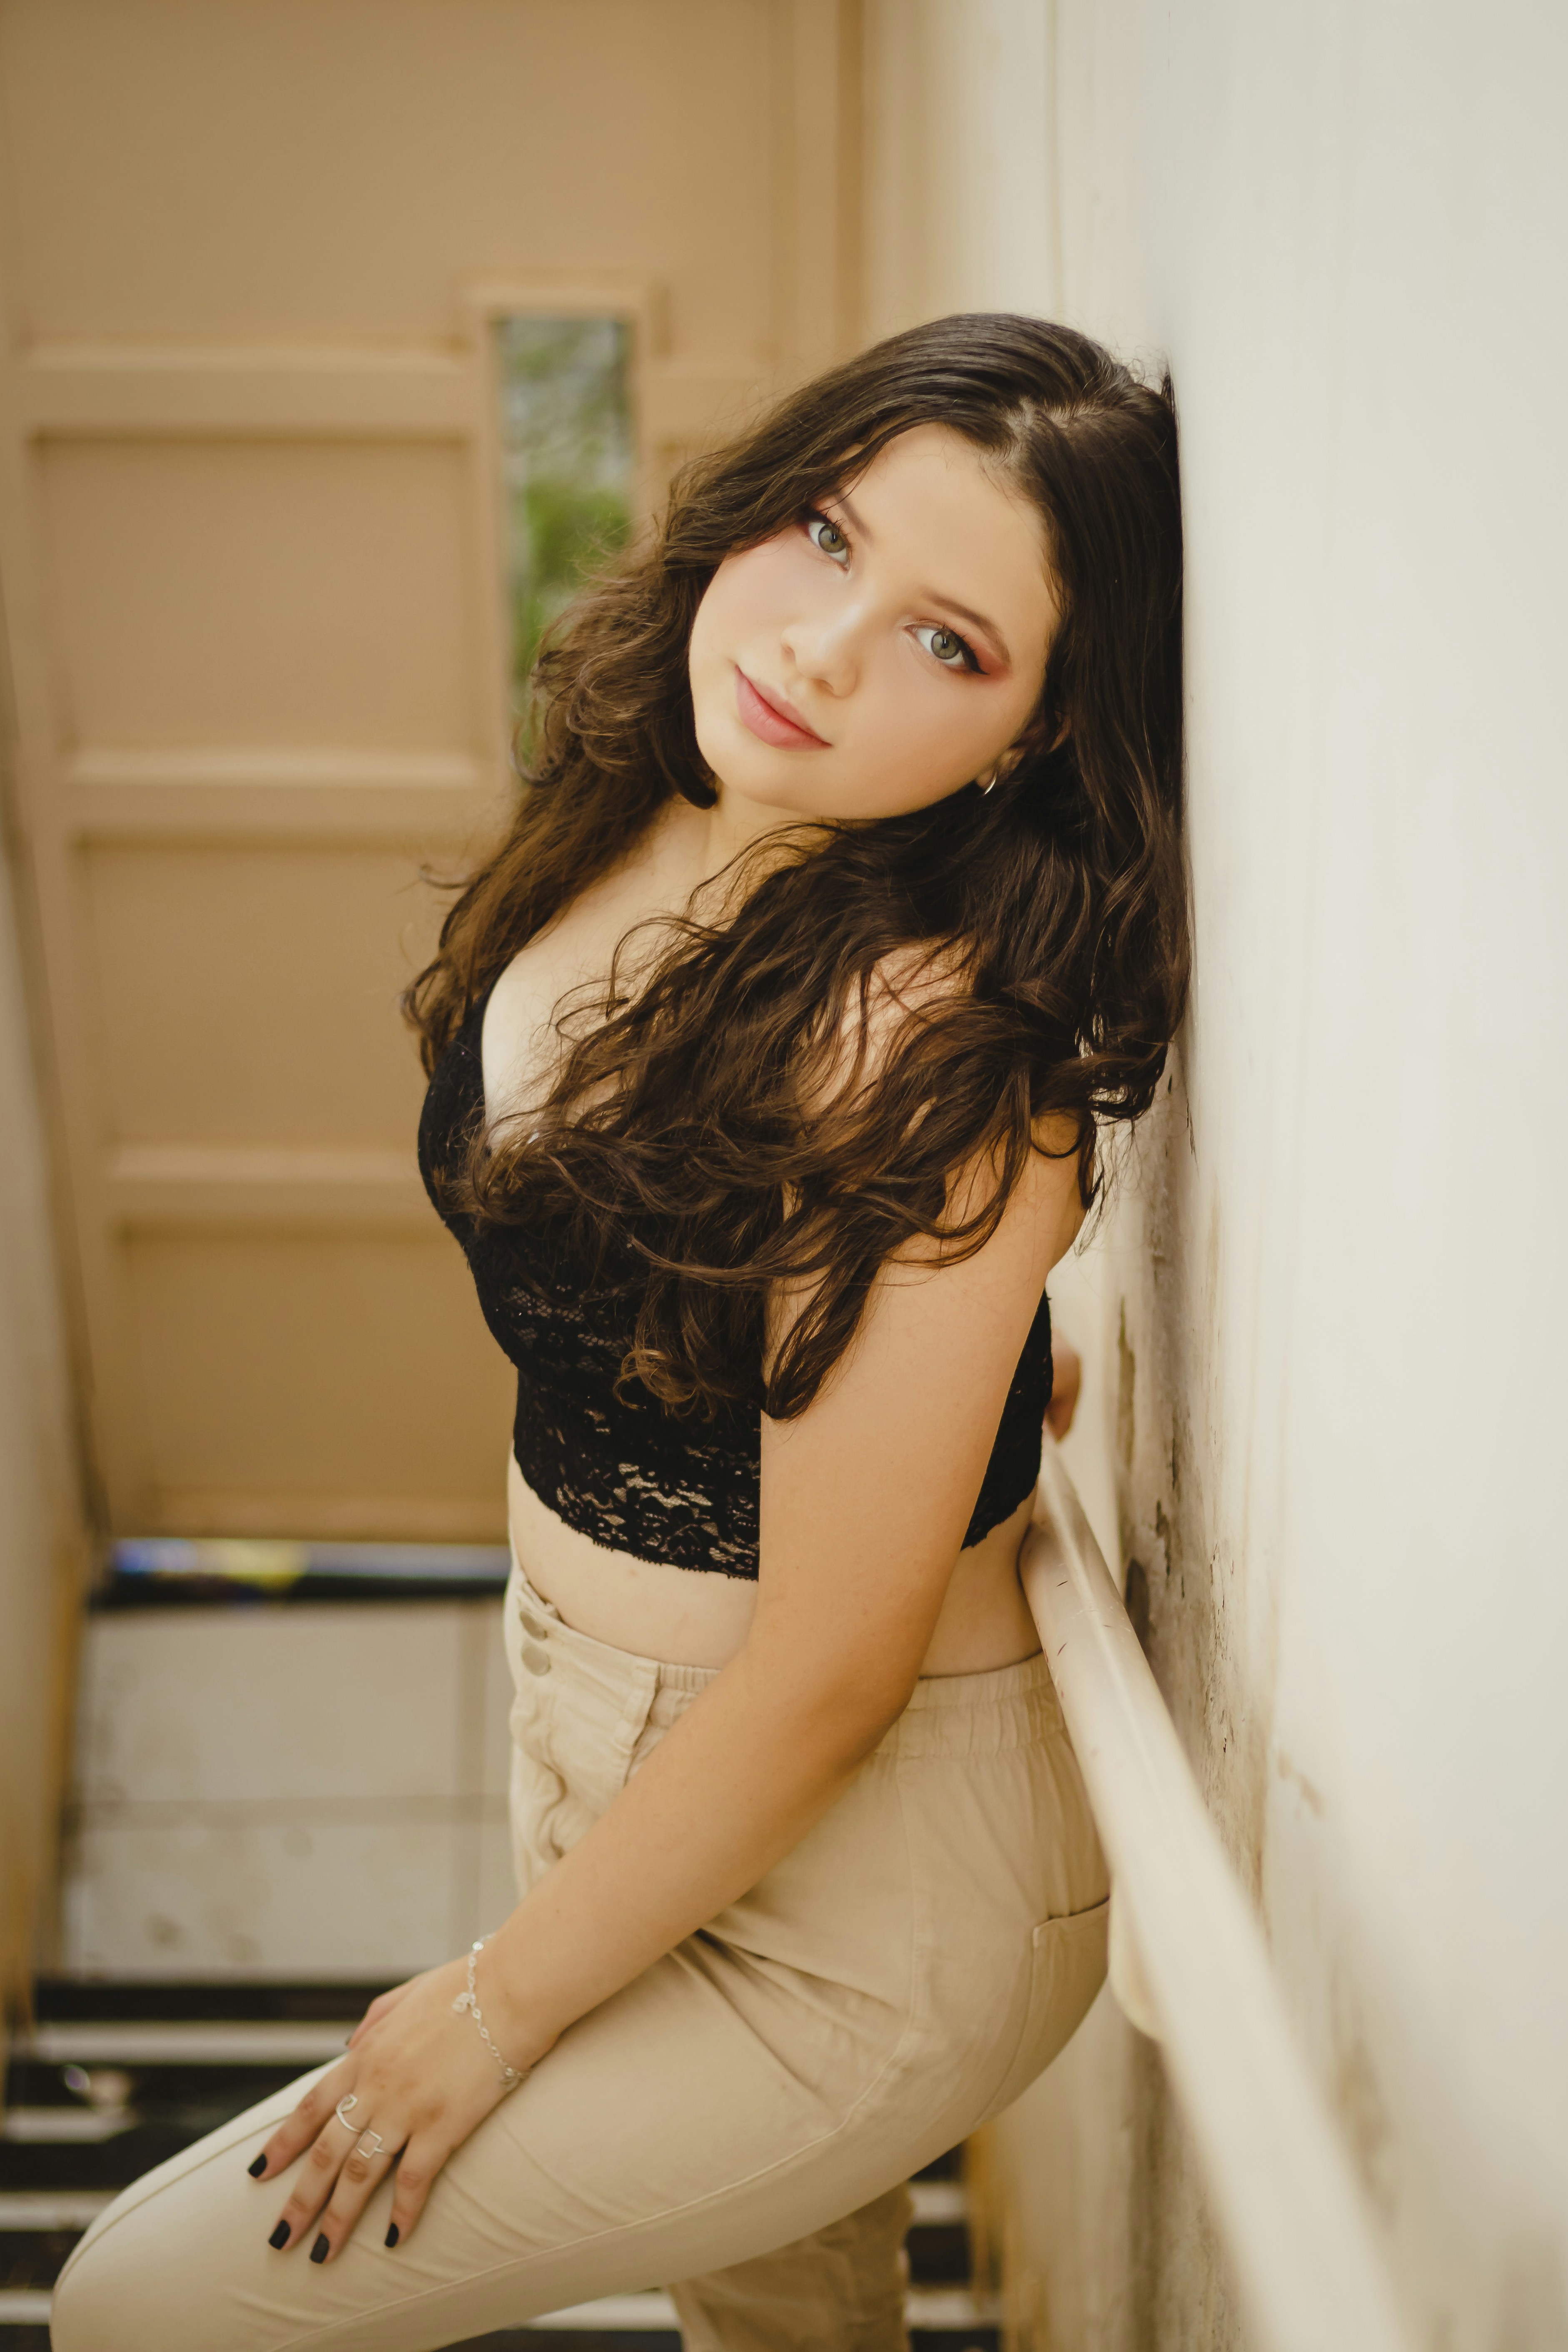 A beautiful young woman leaning against a wall photo pic